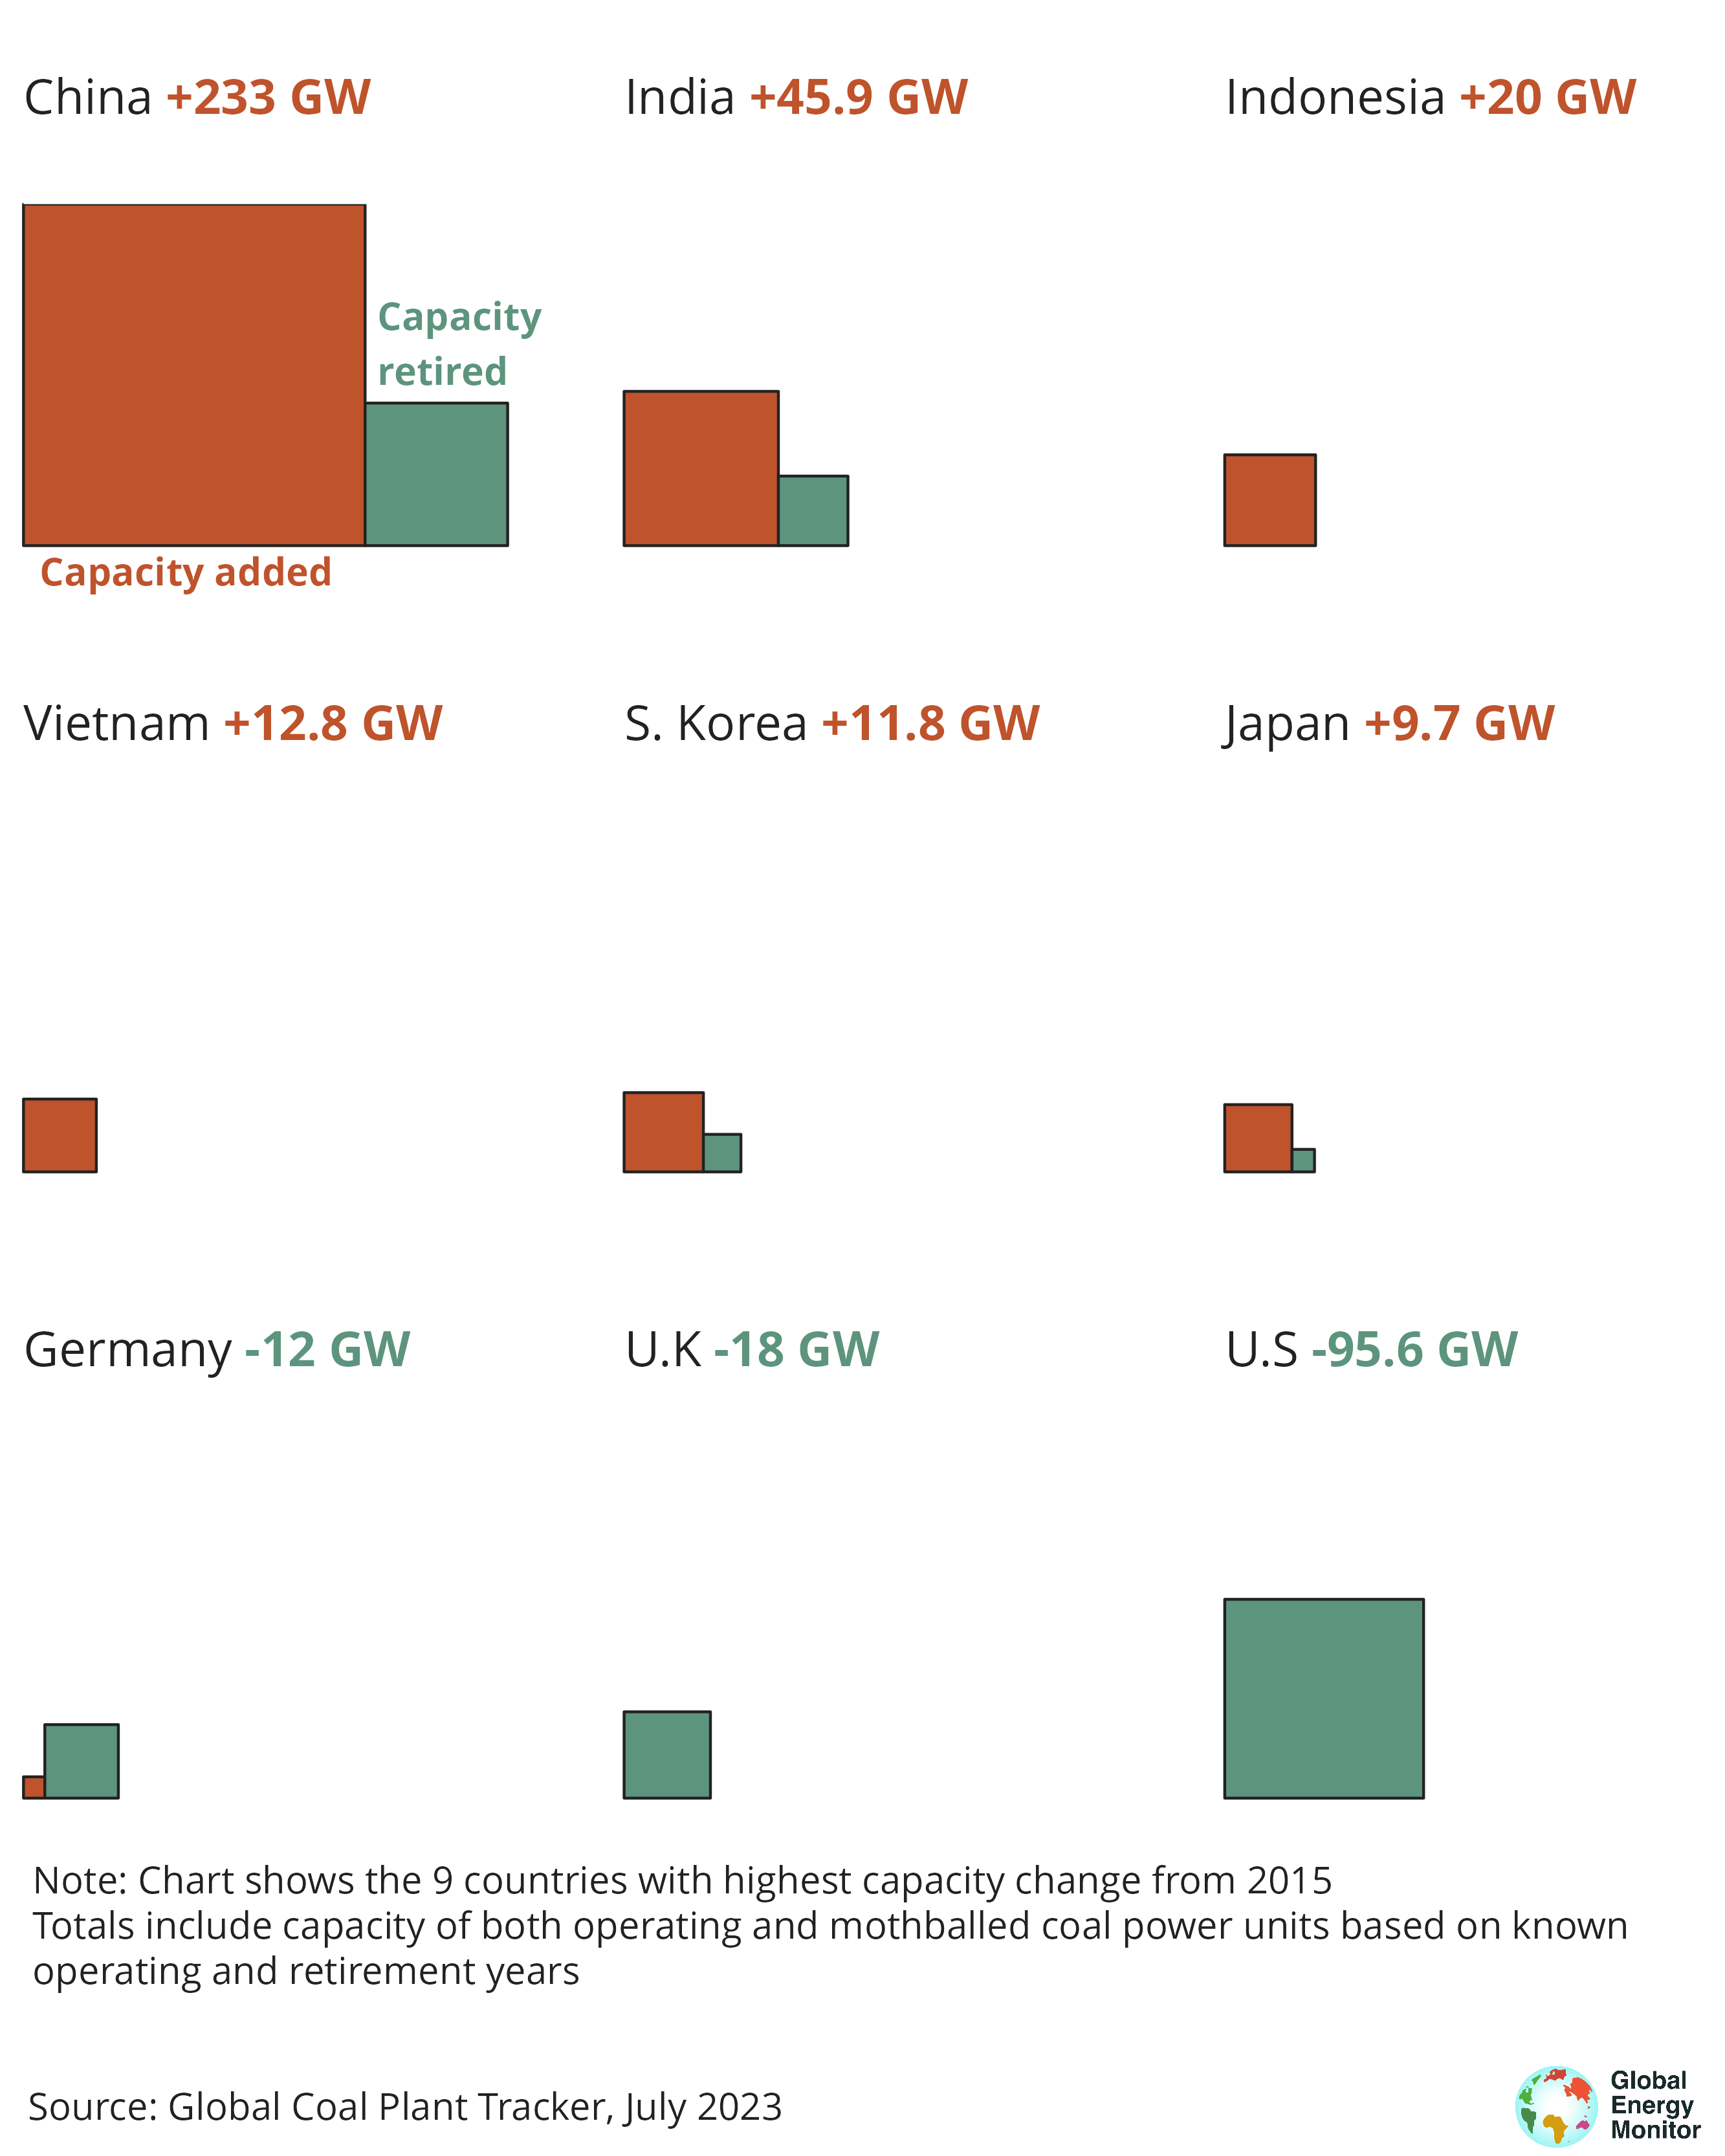 Data visualisation that shows how coal power capacity additions have outpaced retirements since the 2015 Paris Agreement, highlighting how China has added more capacity than retired (net change + 233 gigawatts), while the US on the other hand having retired more with a net change of -96.6 gigawatts. 